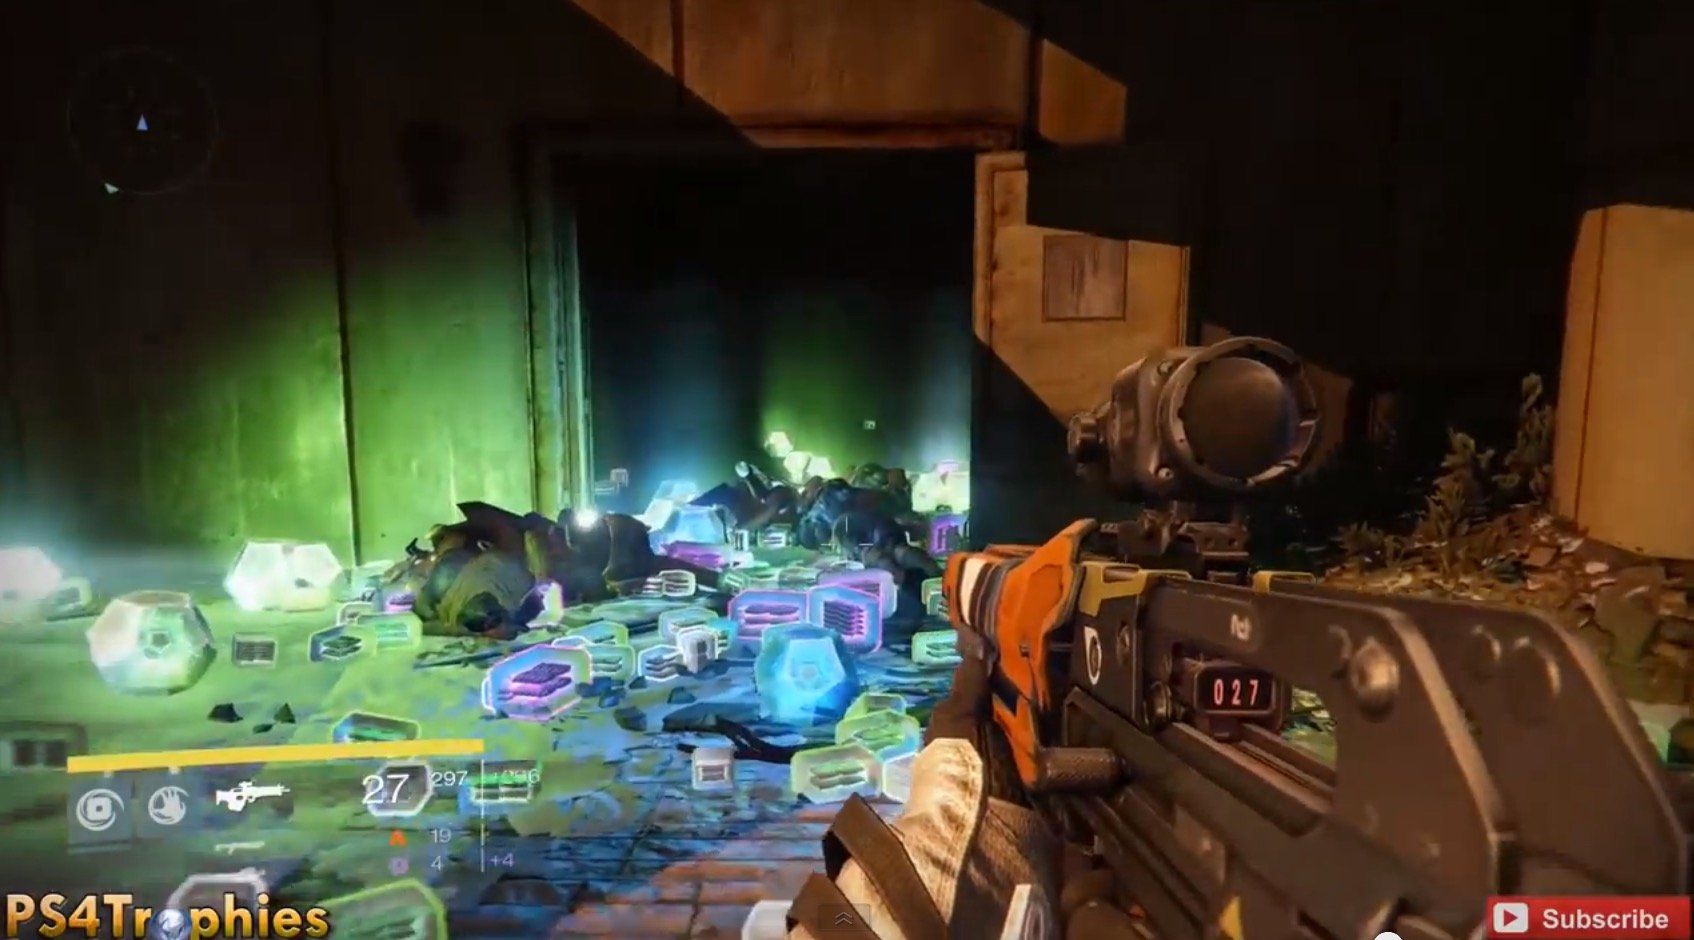 Here's what awaits at the new Destiny Loot Cave, 2.0, which is a perfect place for Legendary Engram farming.